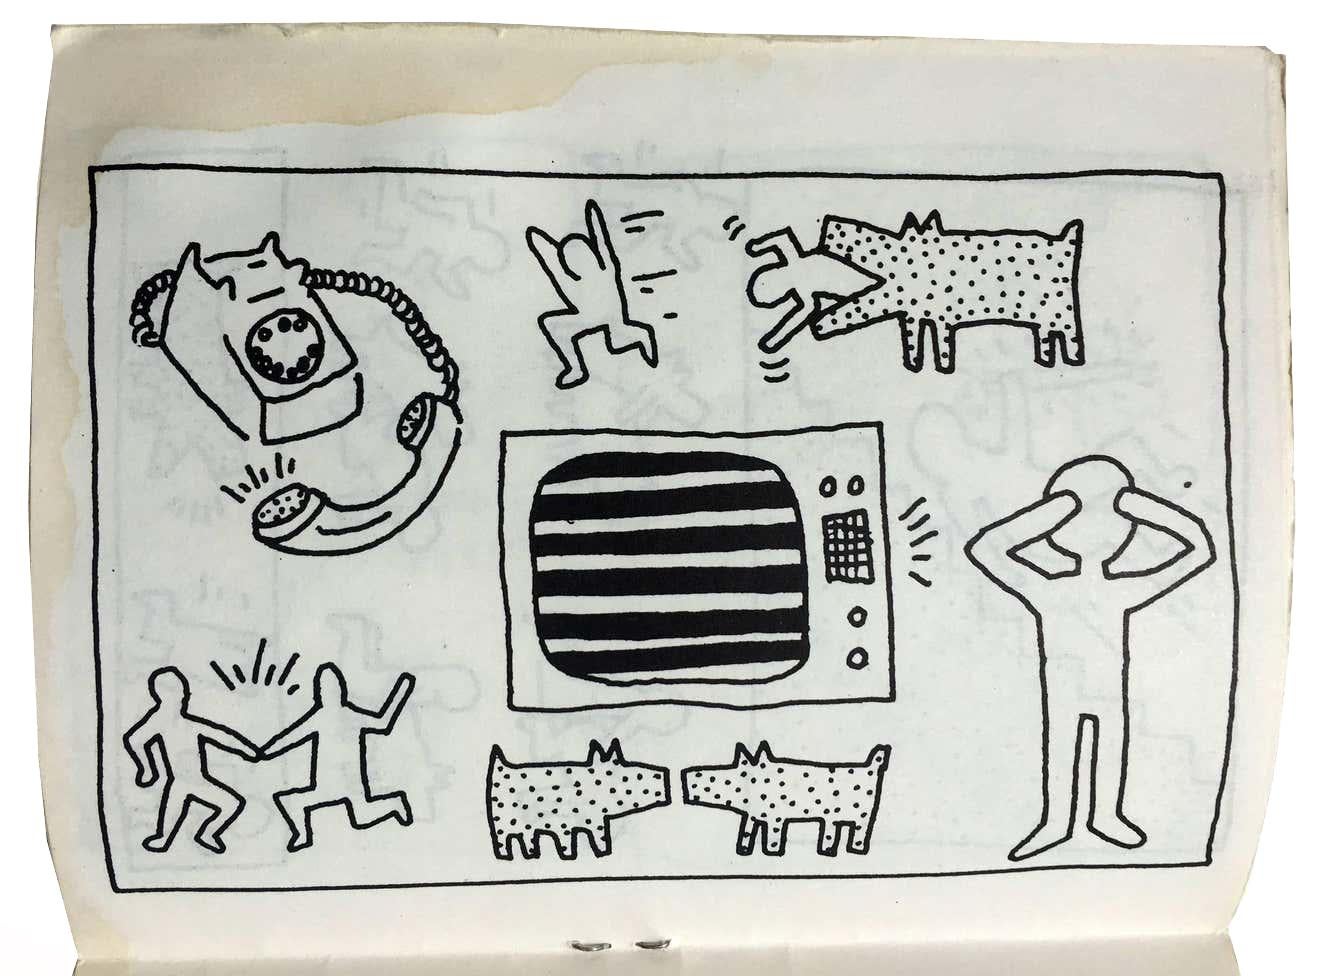 Keith Haring First Book, (untitled), 1982:
This 16-page Art Book was published by Keith Haring, Appearances Press, and the Beard’s Fund in 1982. Featuring offset lithographic images of the artist's felt-tip pen drawings on paper, the finished book